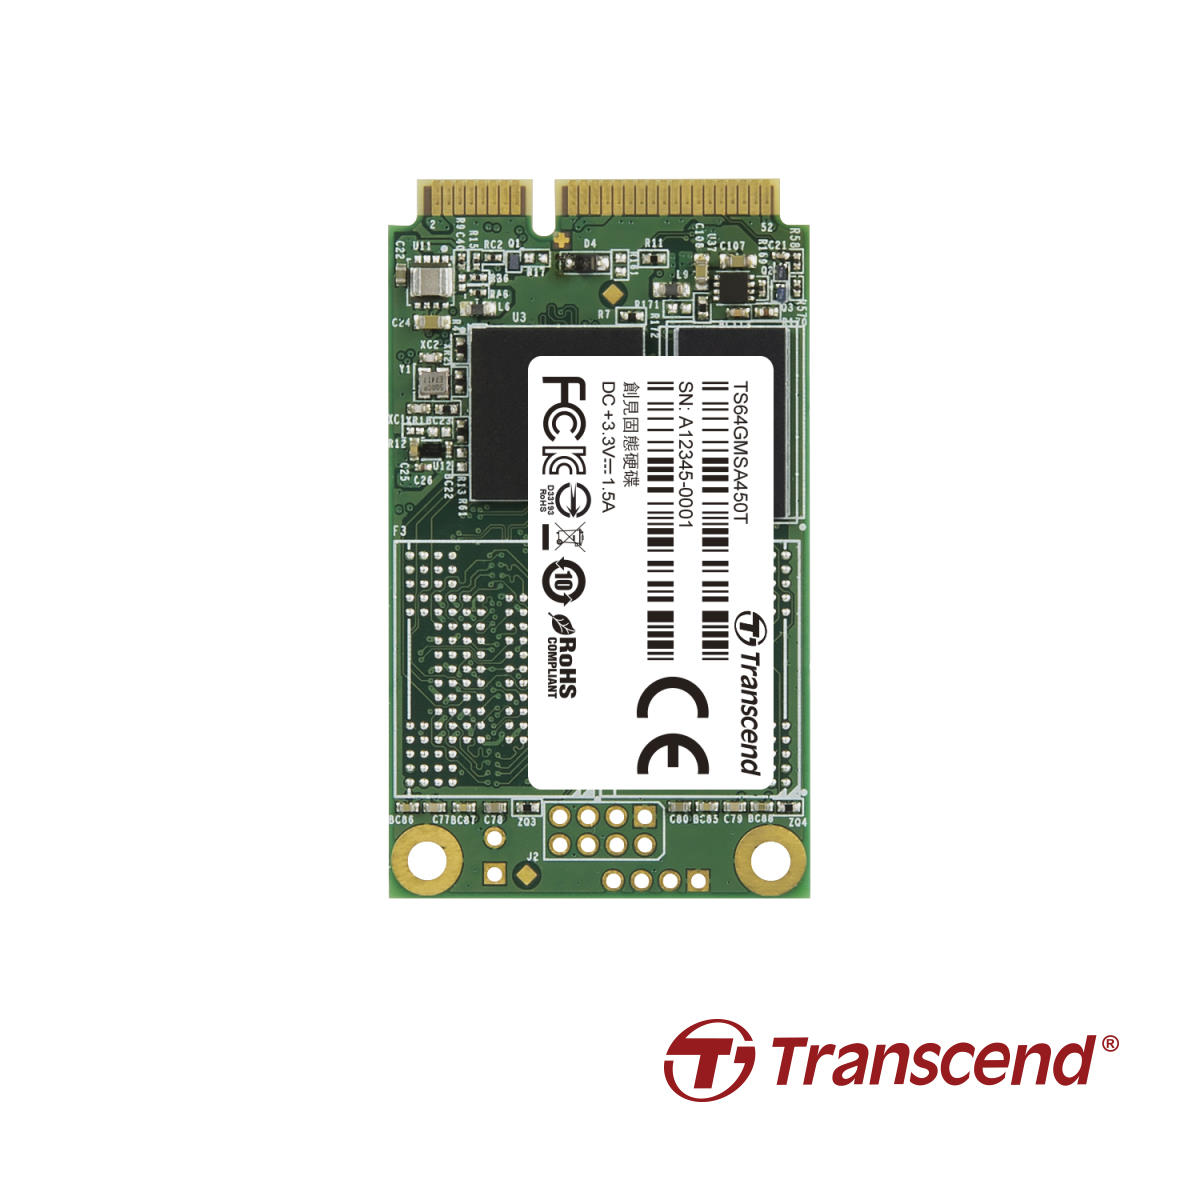 Transcend Announces New MSA450T mSATA 3D TLC SSD for Embedded Applications